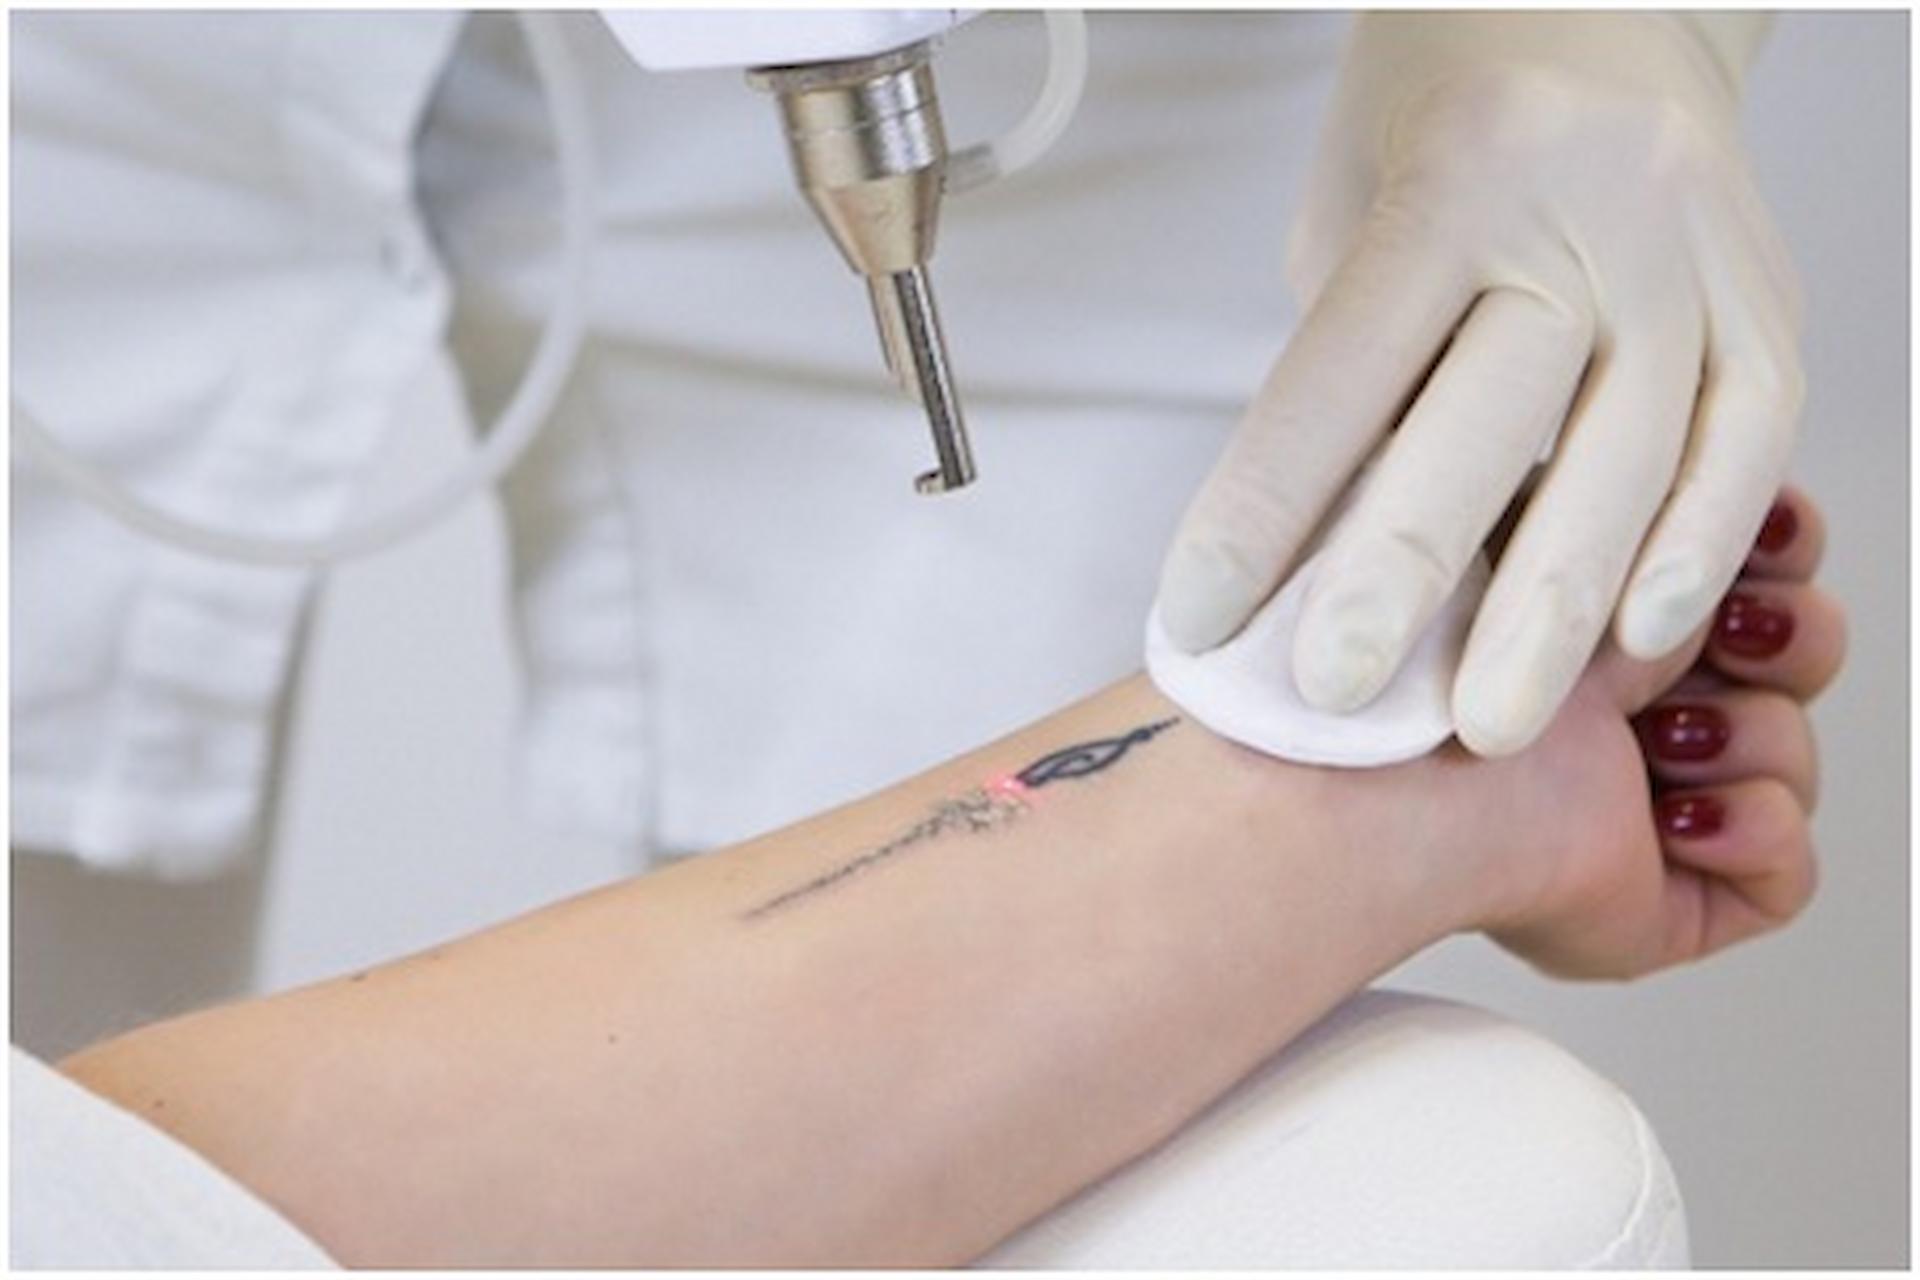 How To Book The Best Tattoo Removal Experts Locally?